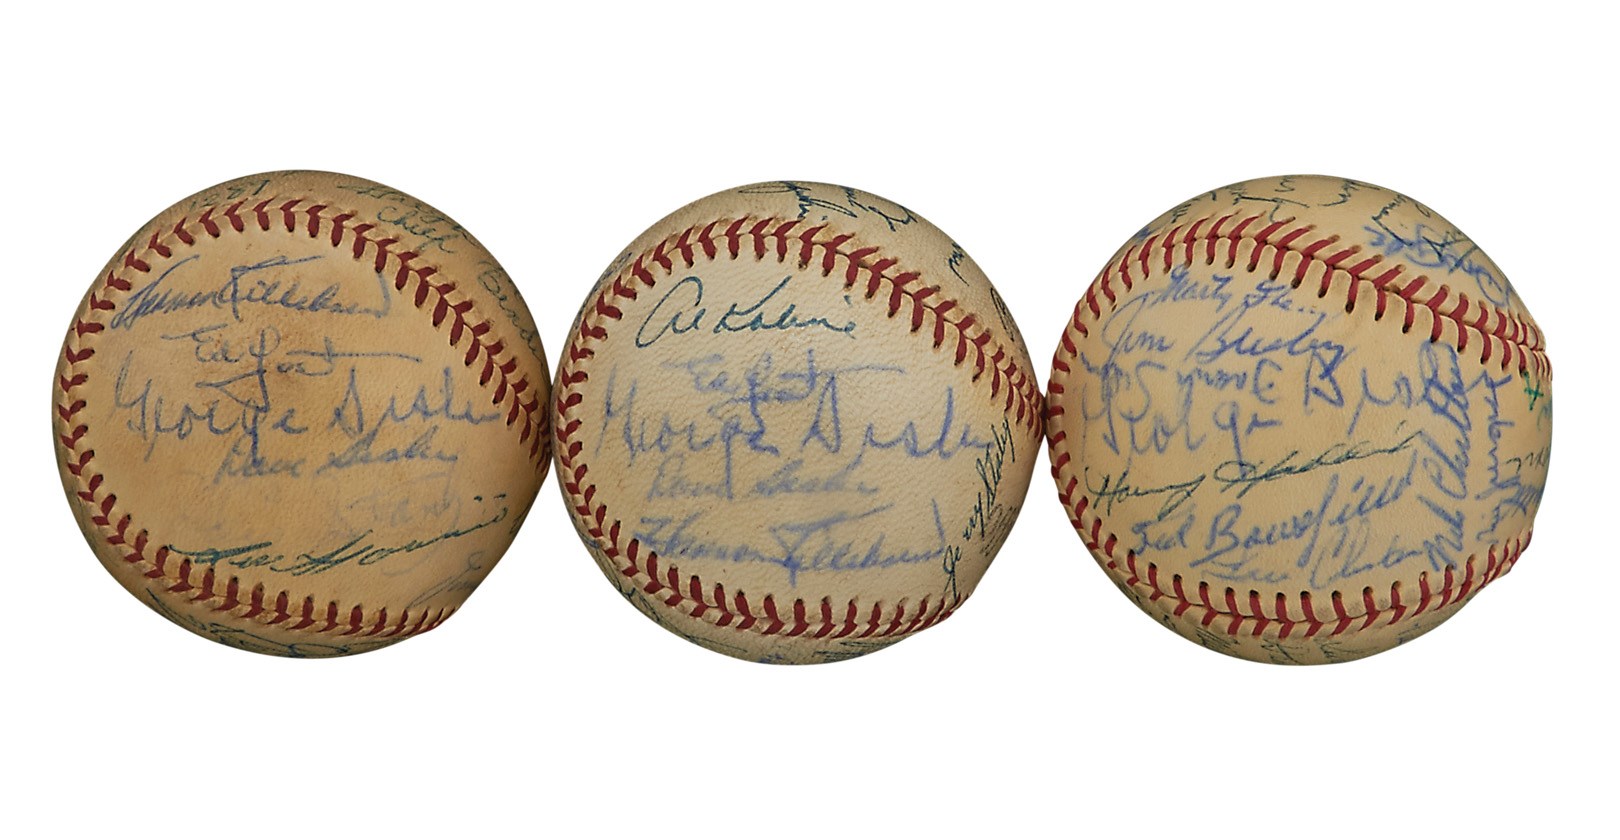 The John O'connor Signed Baseball Collection - 1960s Hall of Fame & Old Timers Signed Baseballs ALL w/George Sisler (PSA) (3)